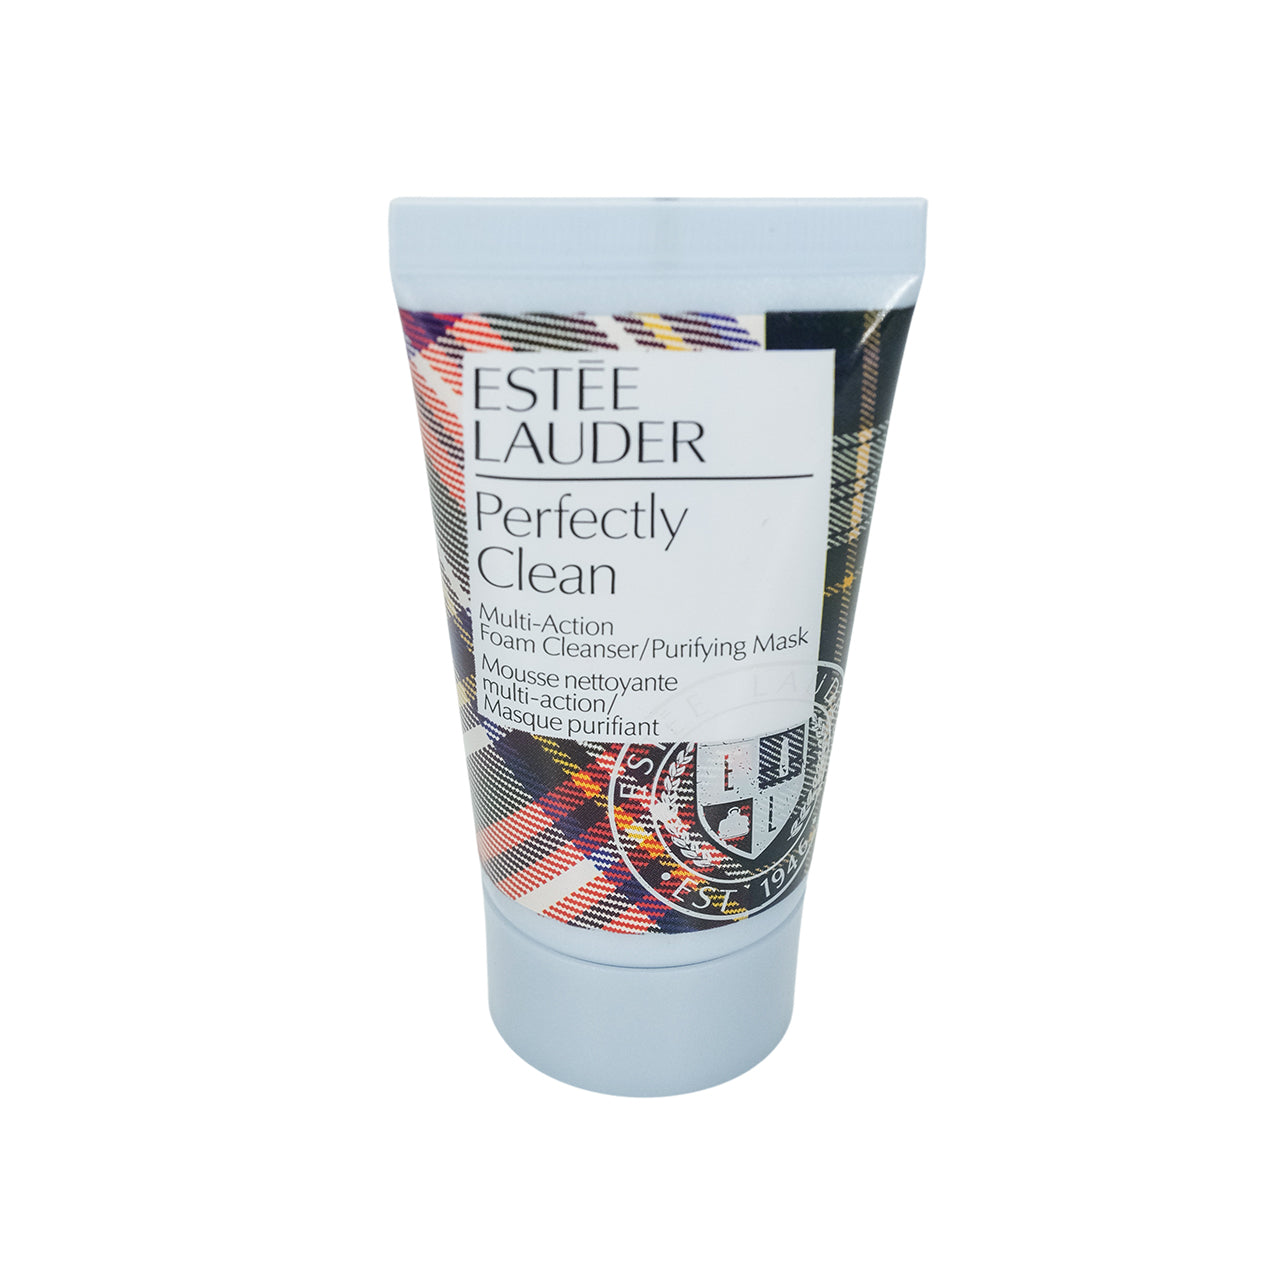 Estee Lauder Perfectly Clean Multi-Action Foam Cleanser/Purifying Mask 30ML | Sasa Global eShop